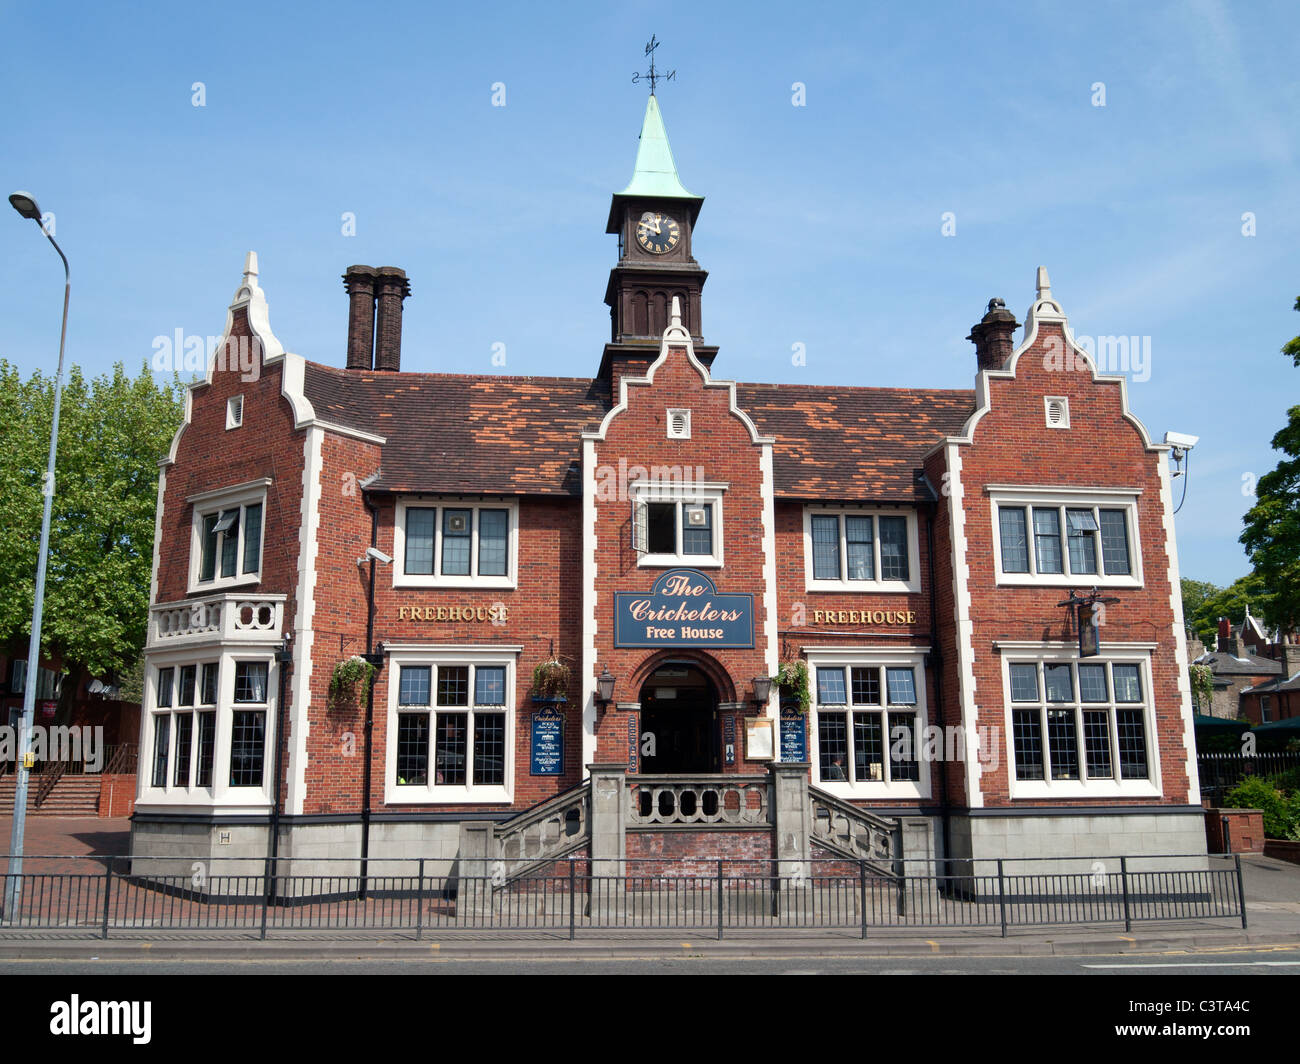 The Cricketers Free House pub in Ipswich, England UK. Stock Photo